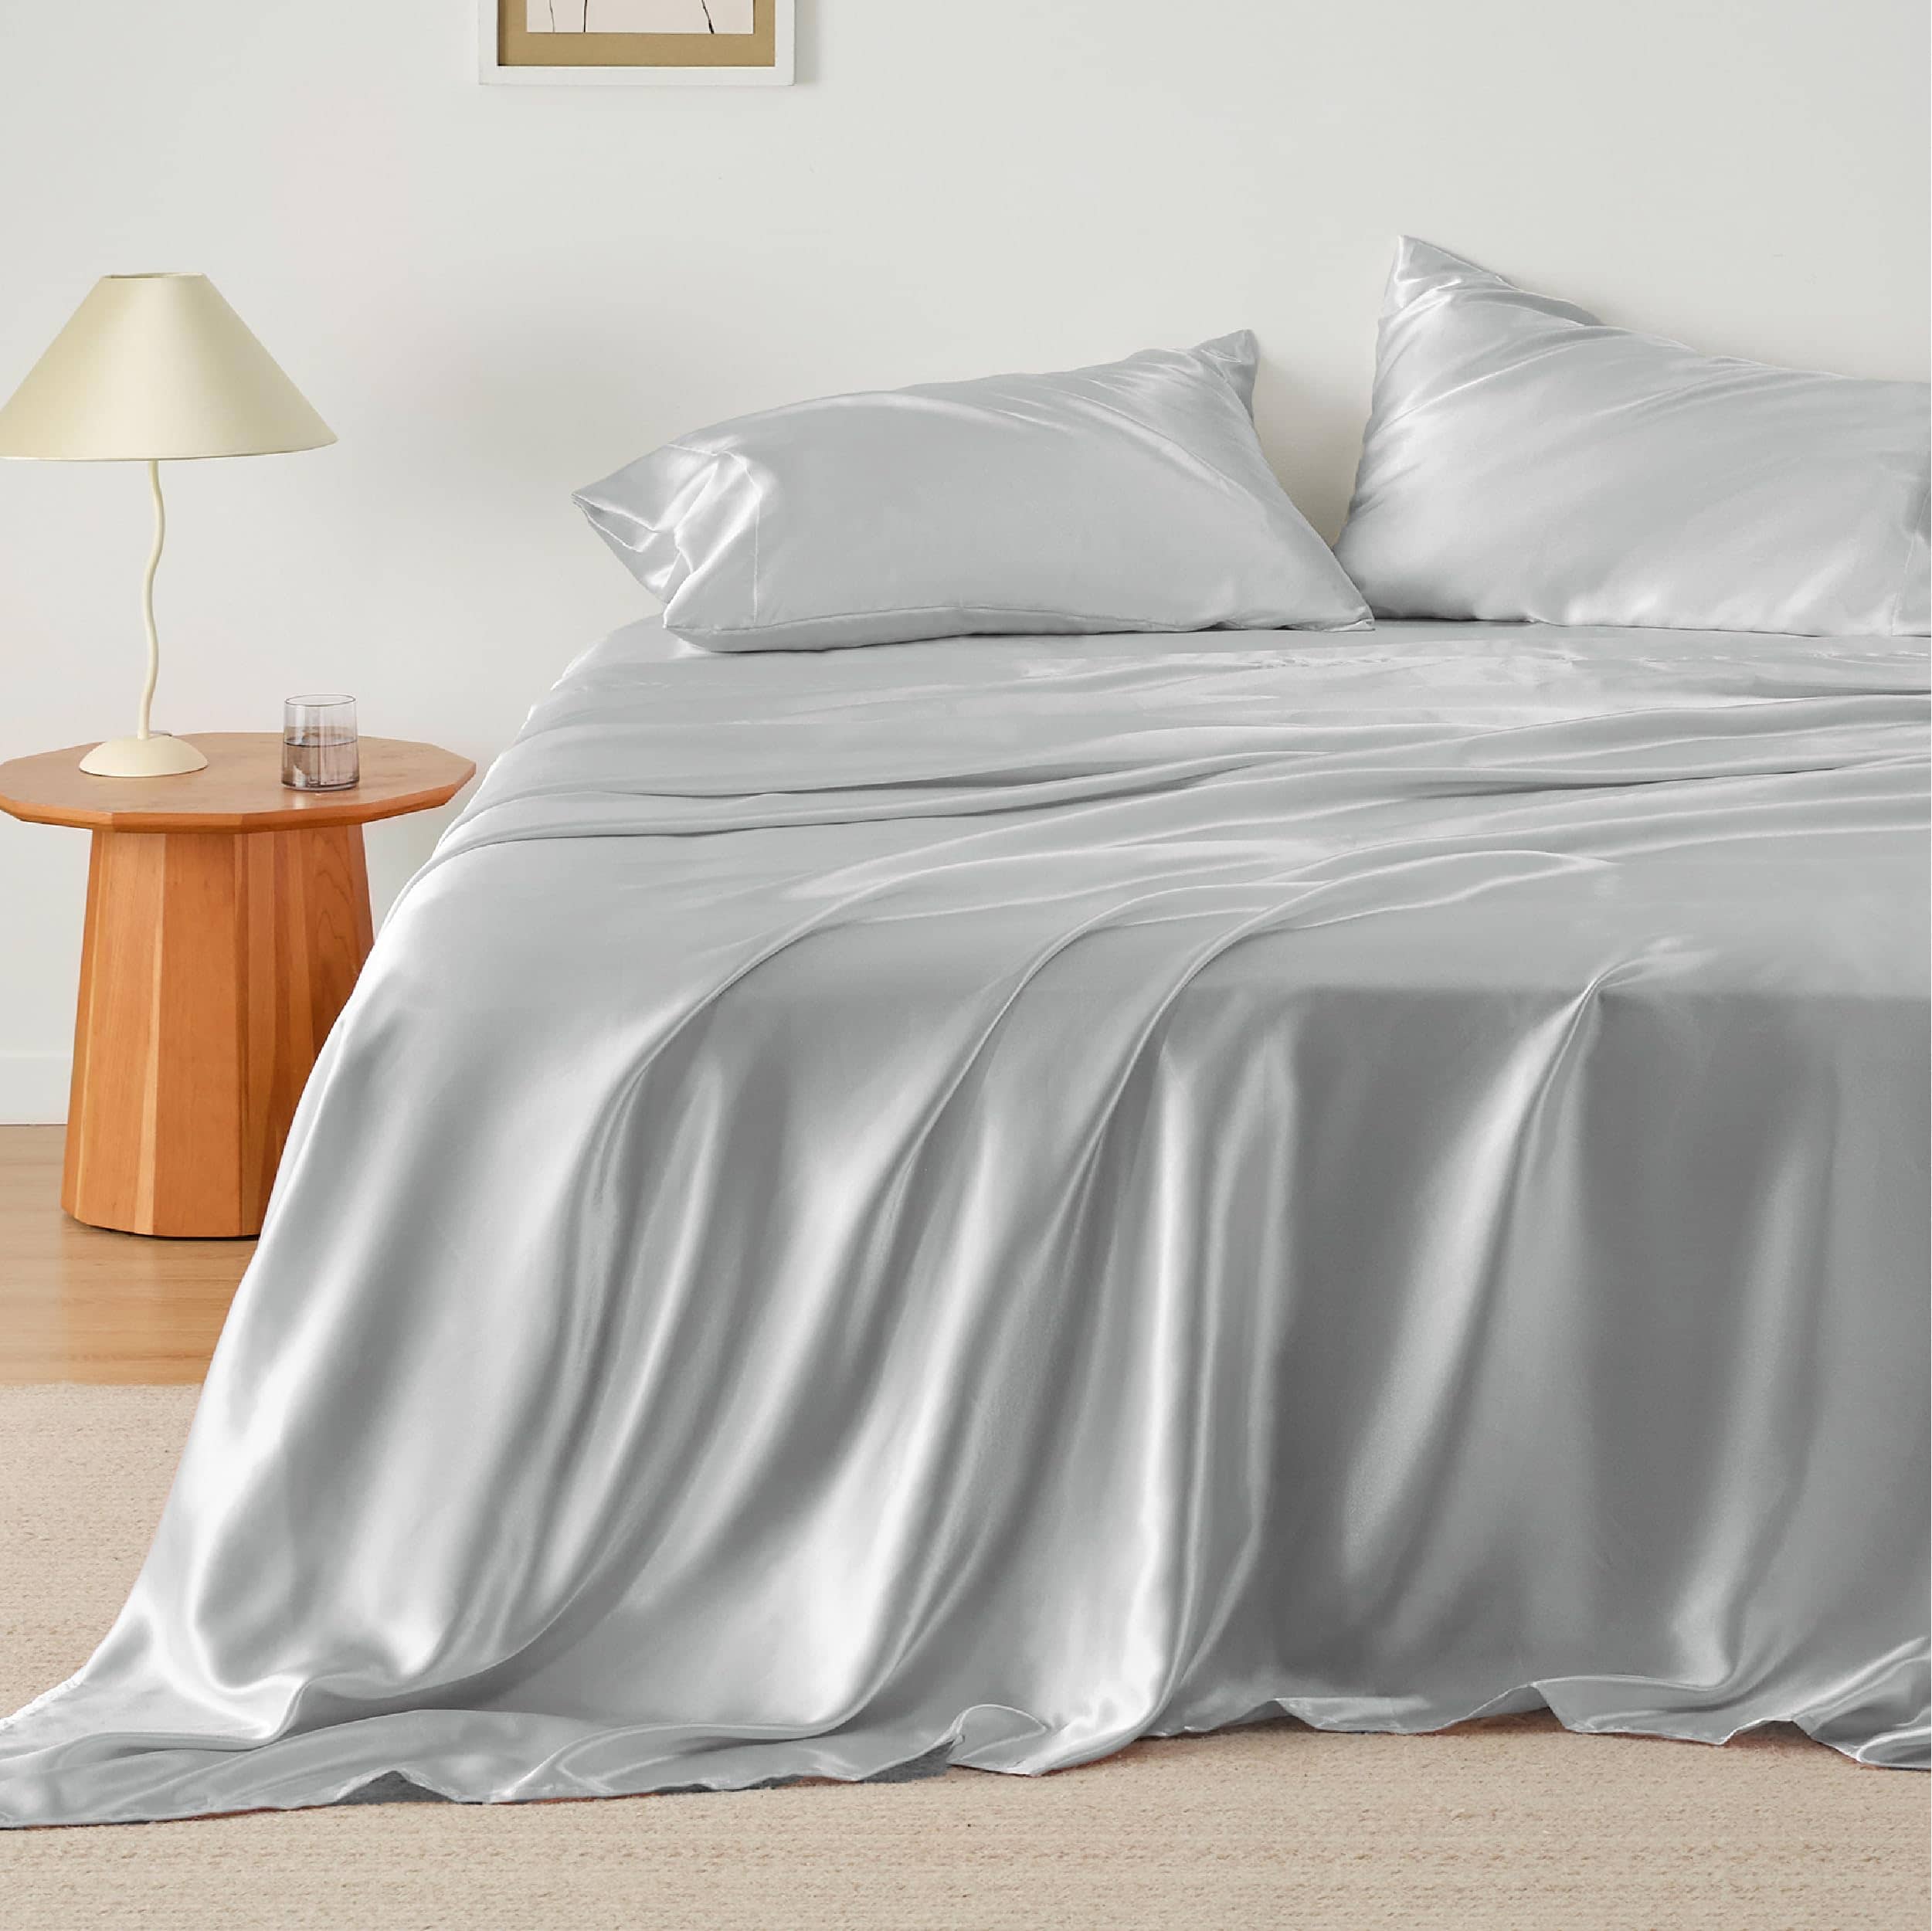 Bedsure Full Size Sheets Grey - Soft Sheets for Full Size Bed, 4 Pieces  Hotel Luxury Full Size Sheet Sets, Easy Care Polyester Microfiber Cooling  Bed